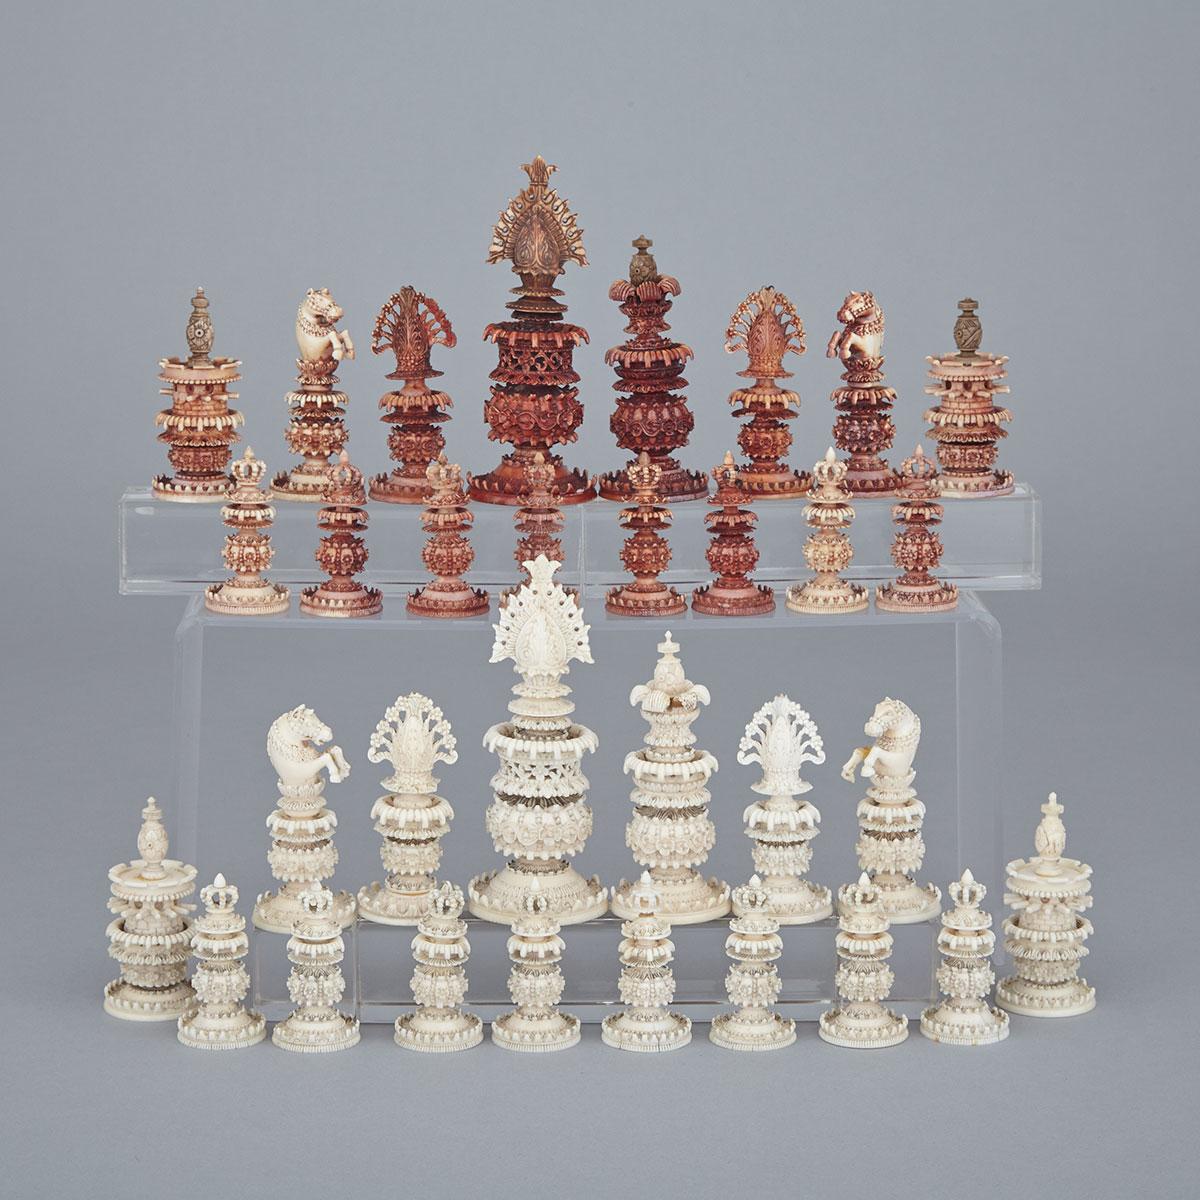 Anglo-Indian Turned and Carved Ivory Chess Set, Kashmir, early/mid 19th century